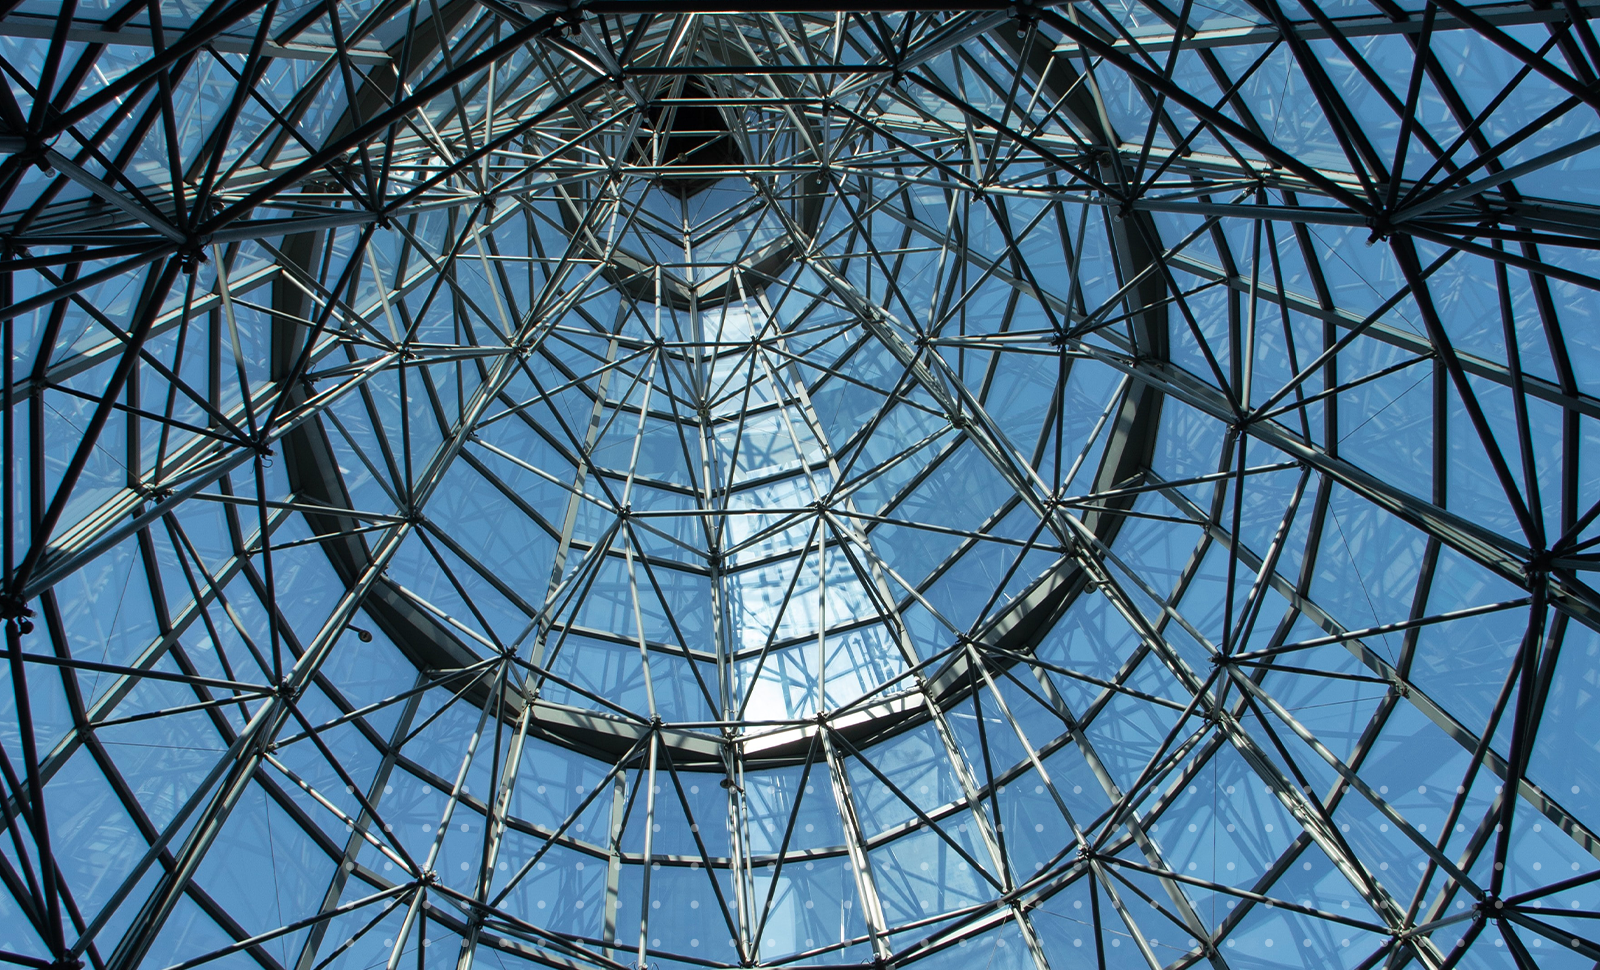 An intricate piece of architecture conveying the concept of a data governance framework